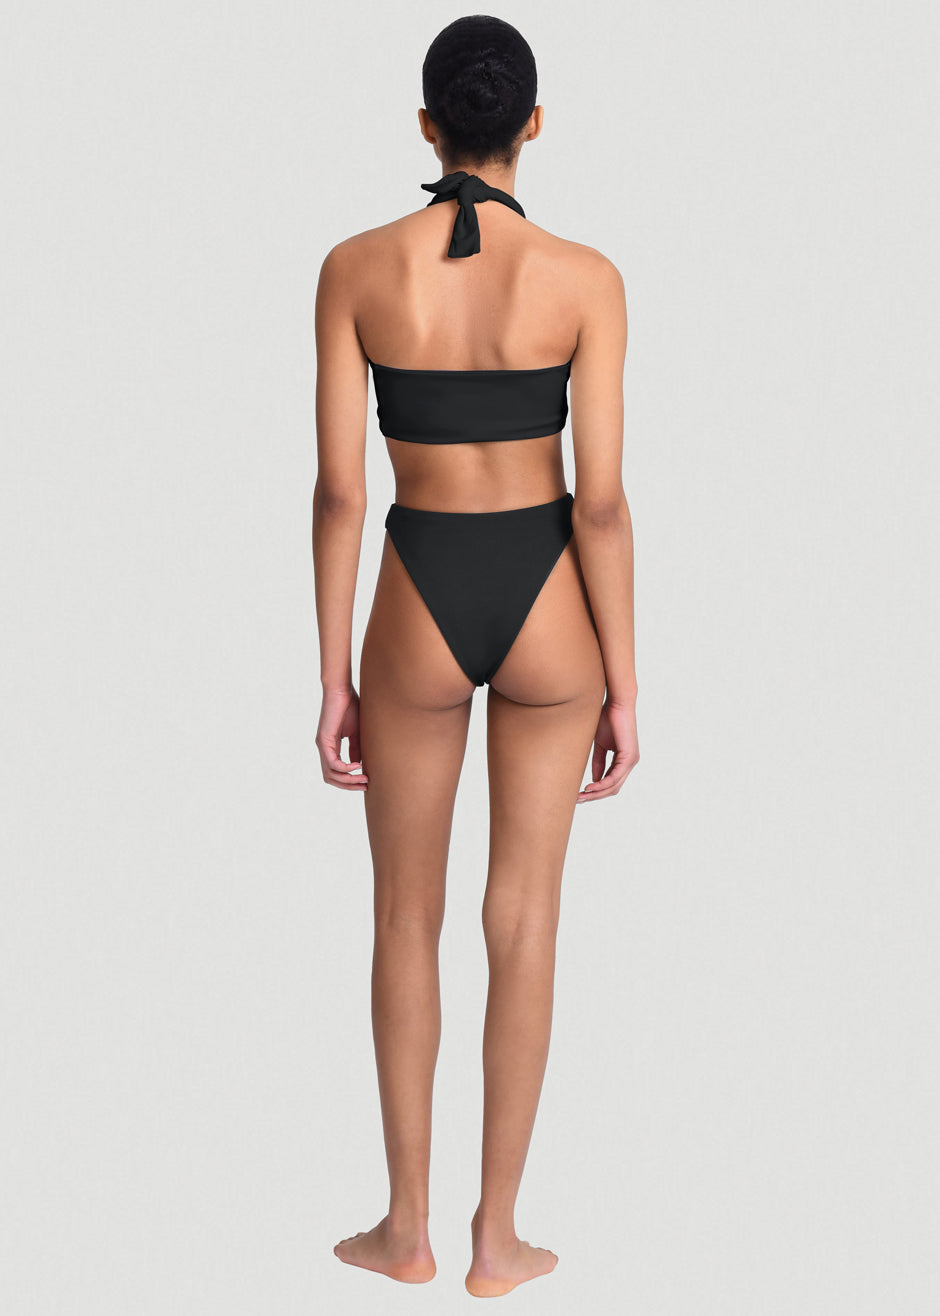 Aexae Triangle High Cut Swimsuit Bottoms - Black - 3